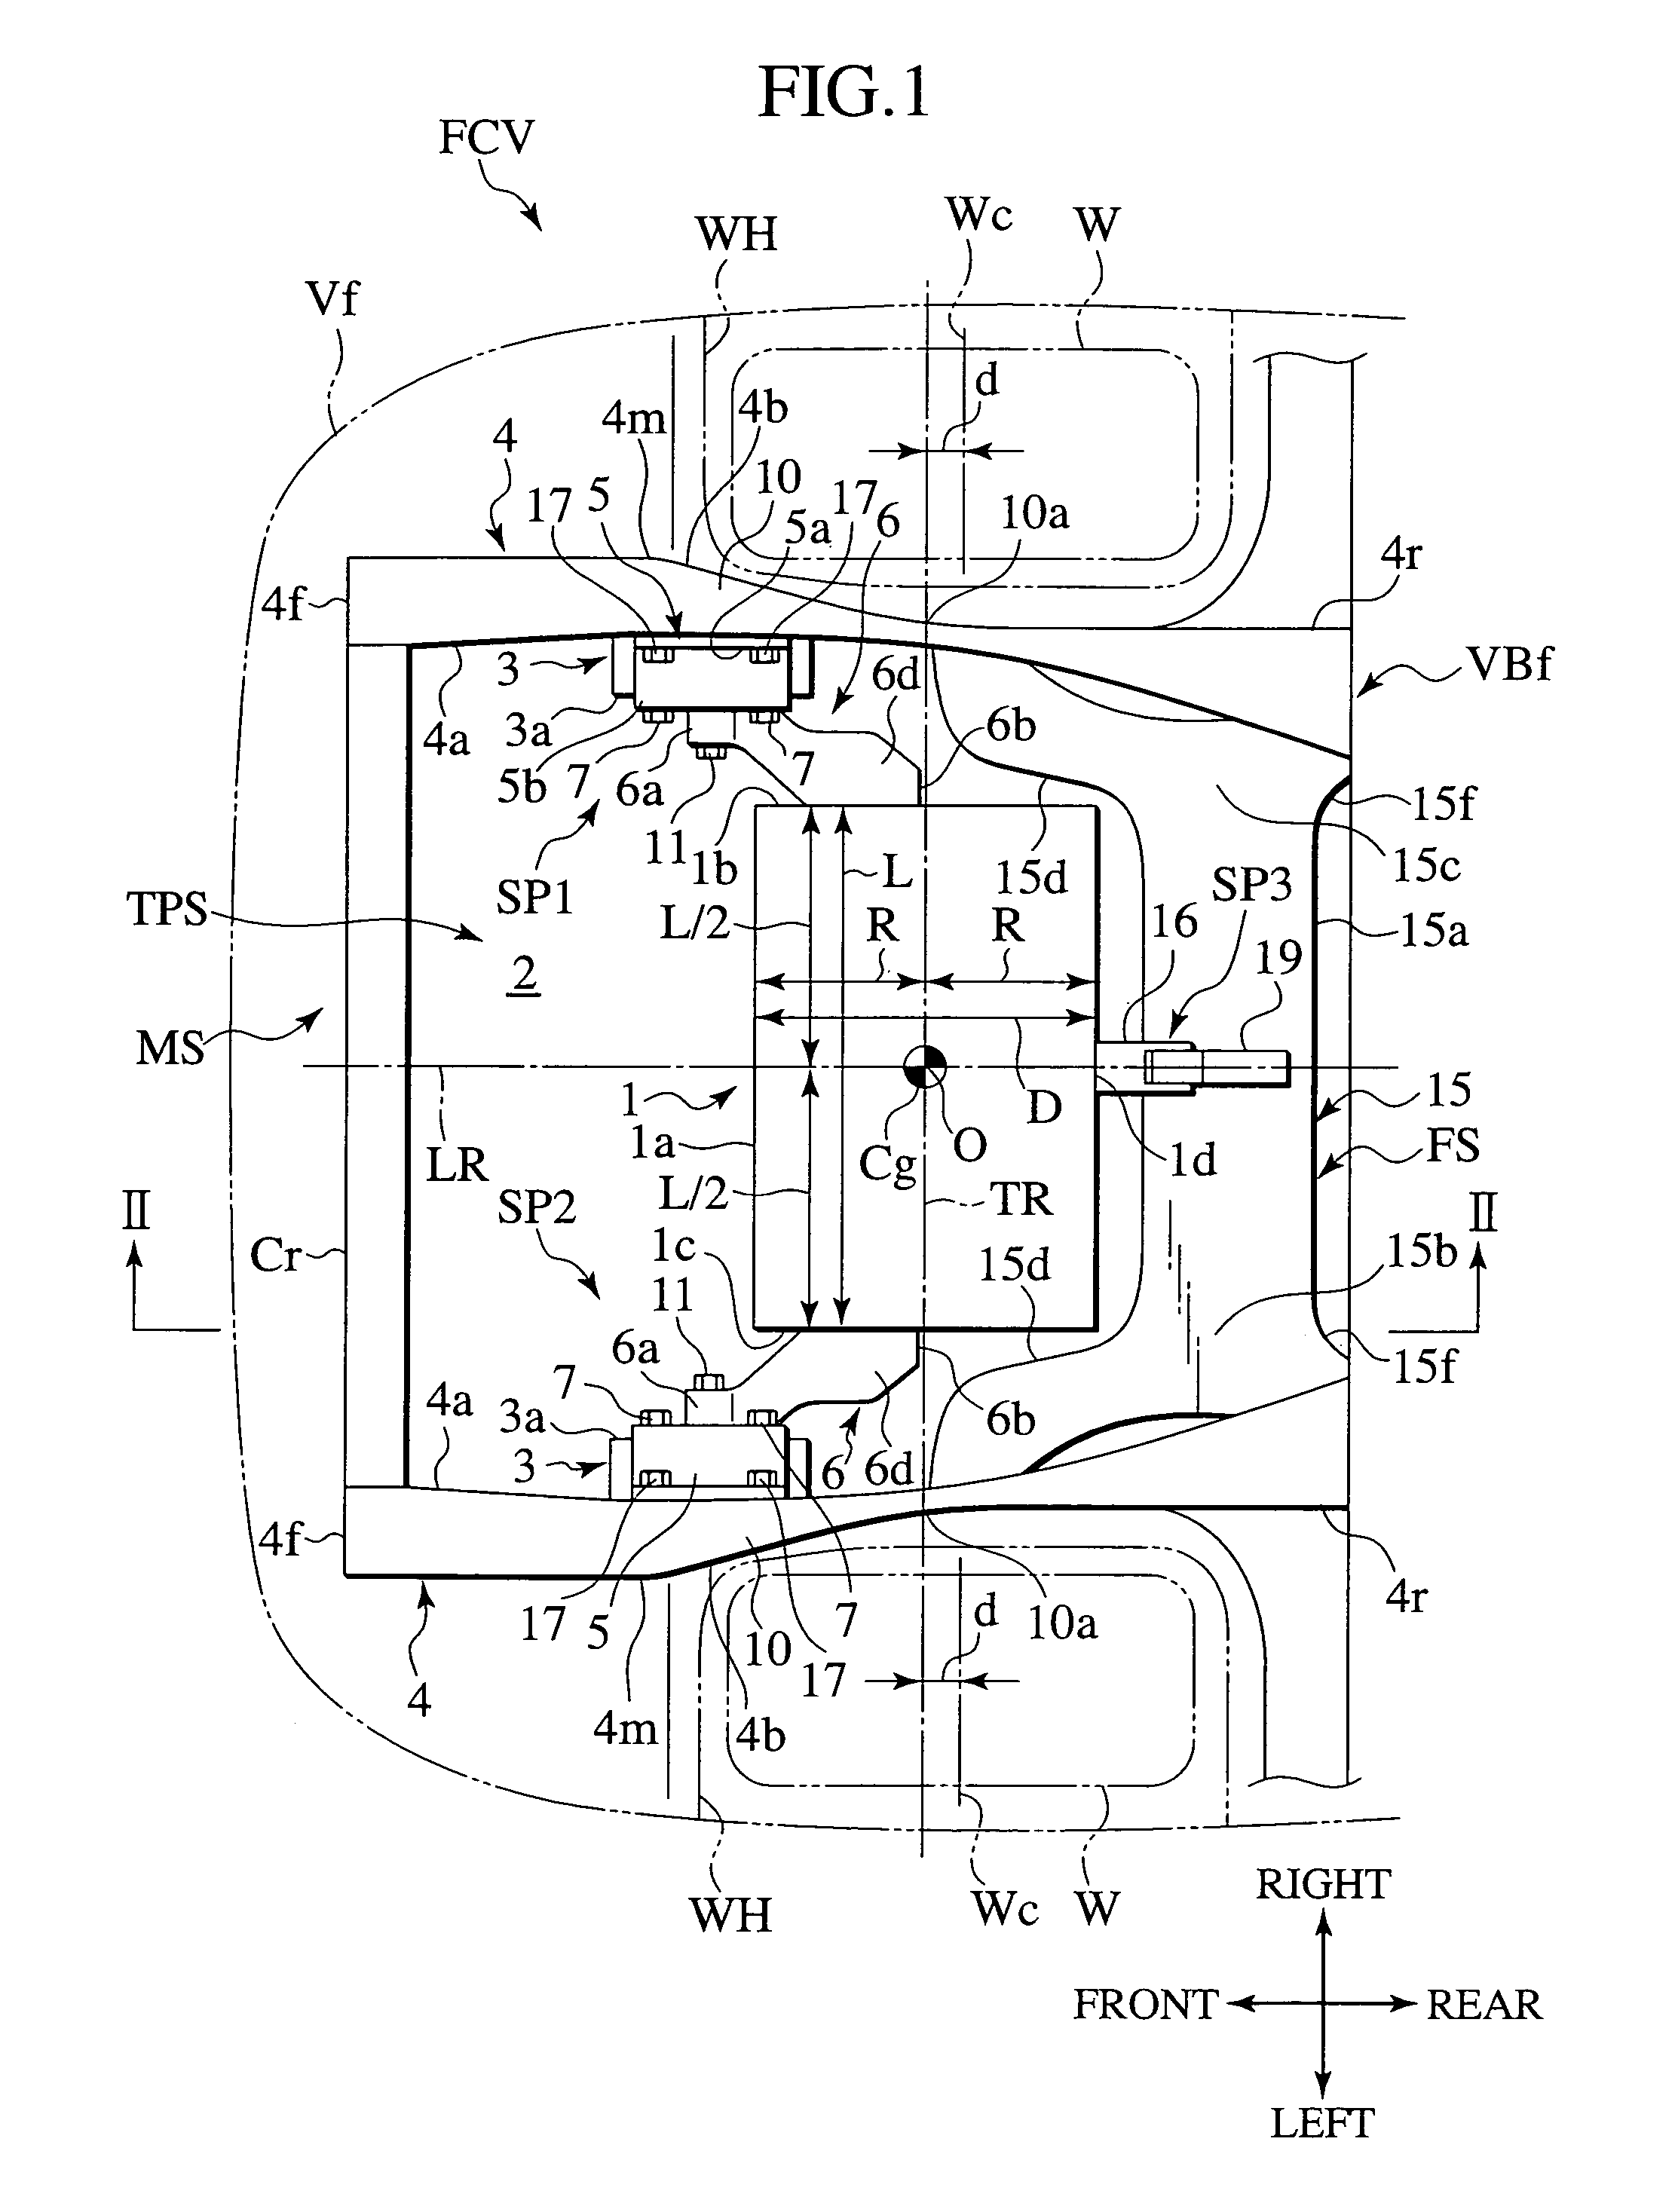 Drive motor mounting structure